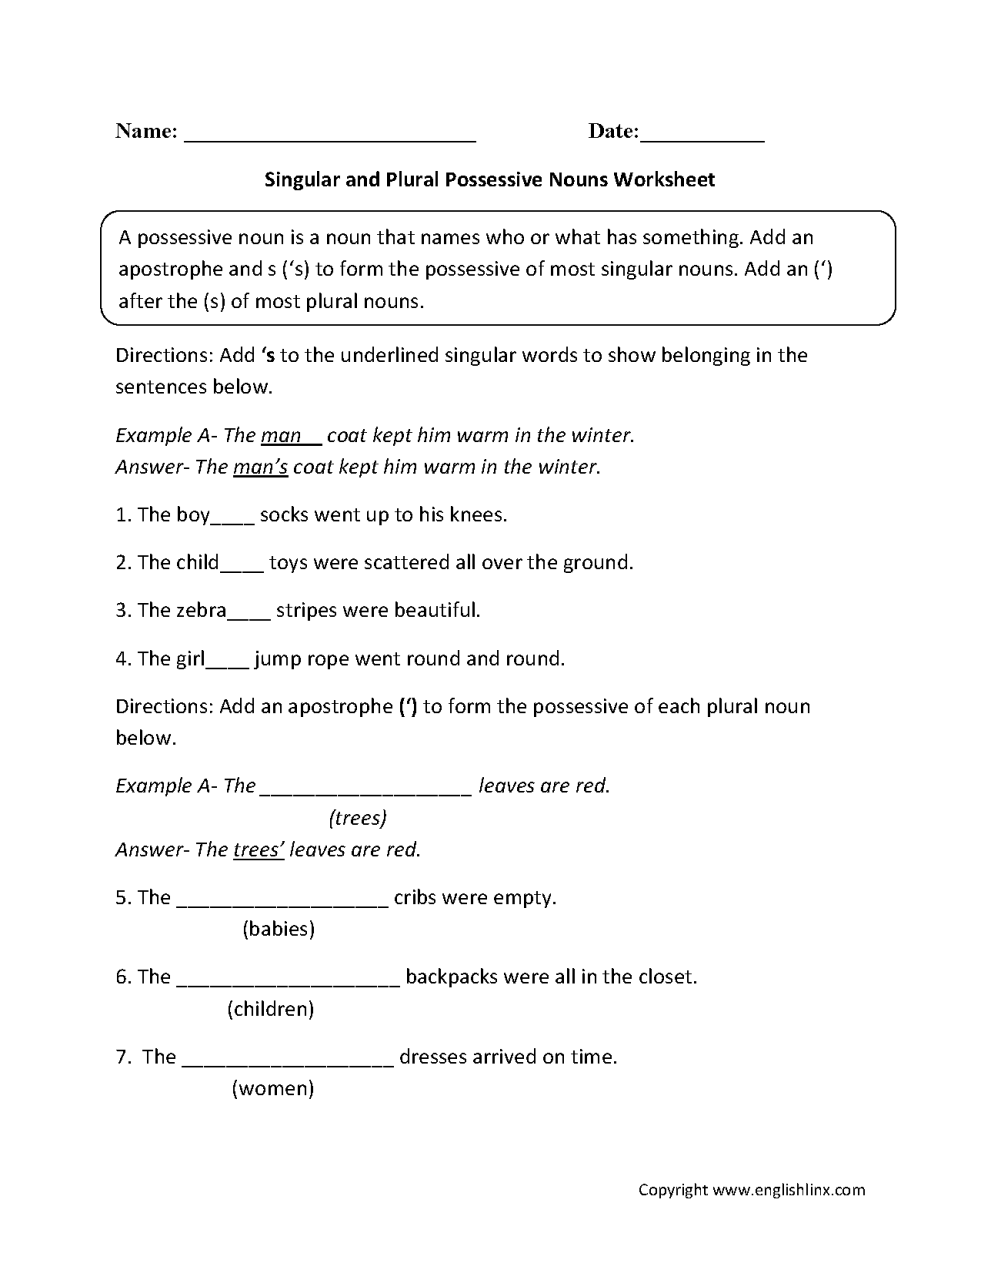 Singular And Plural Nouns Worksheet Grade 6 With Answers